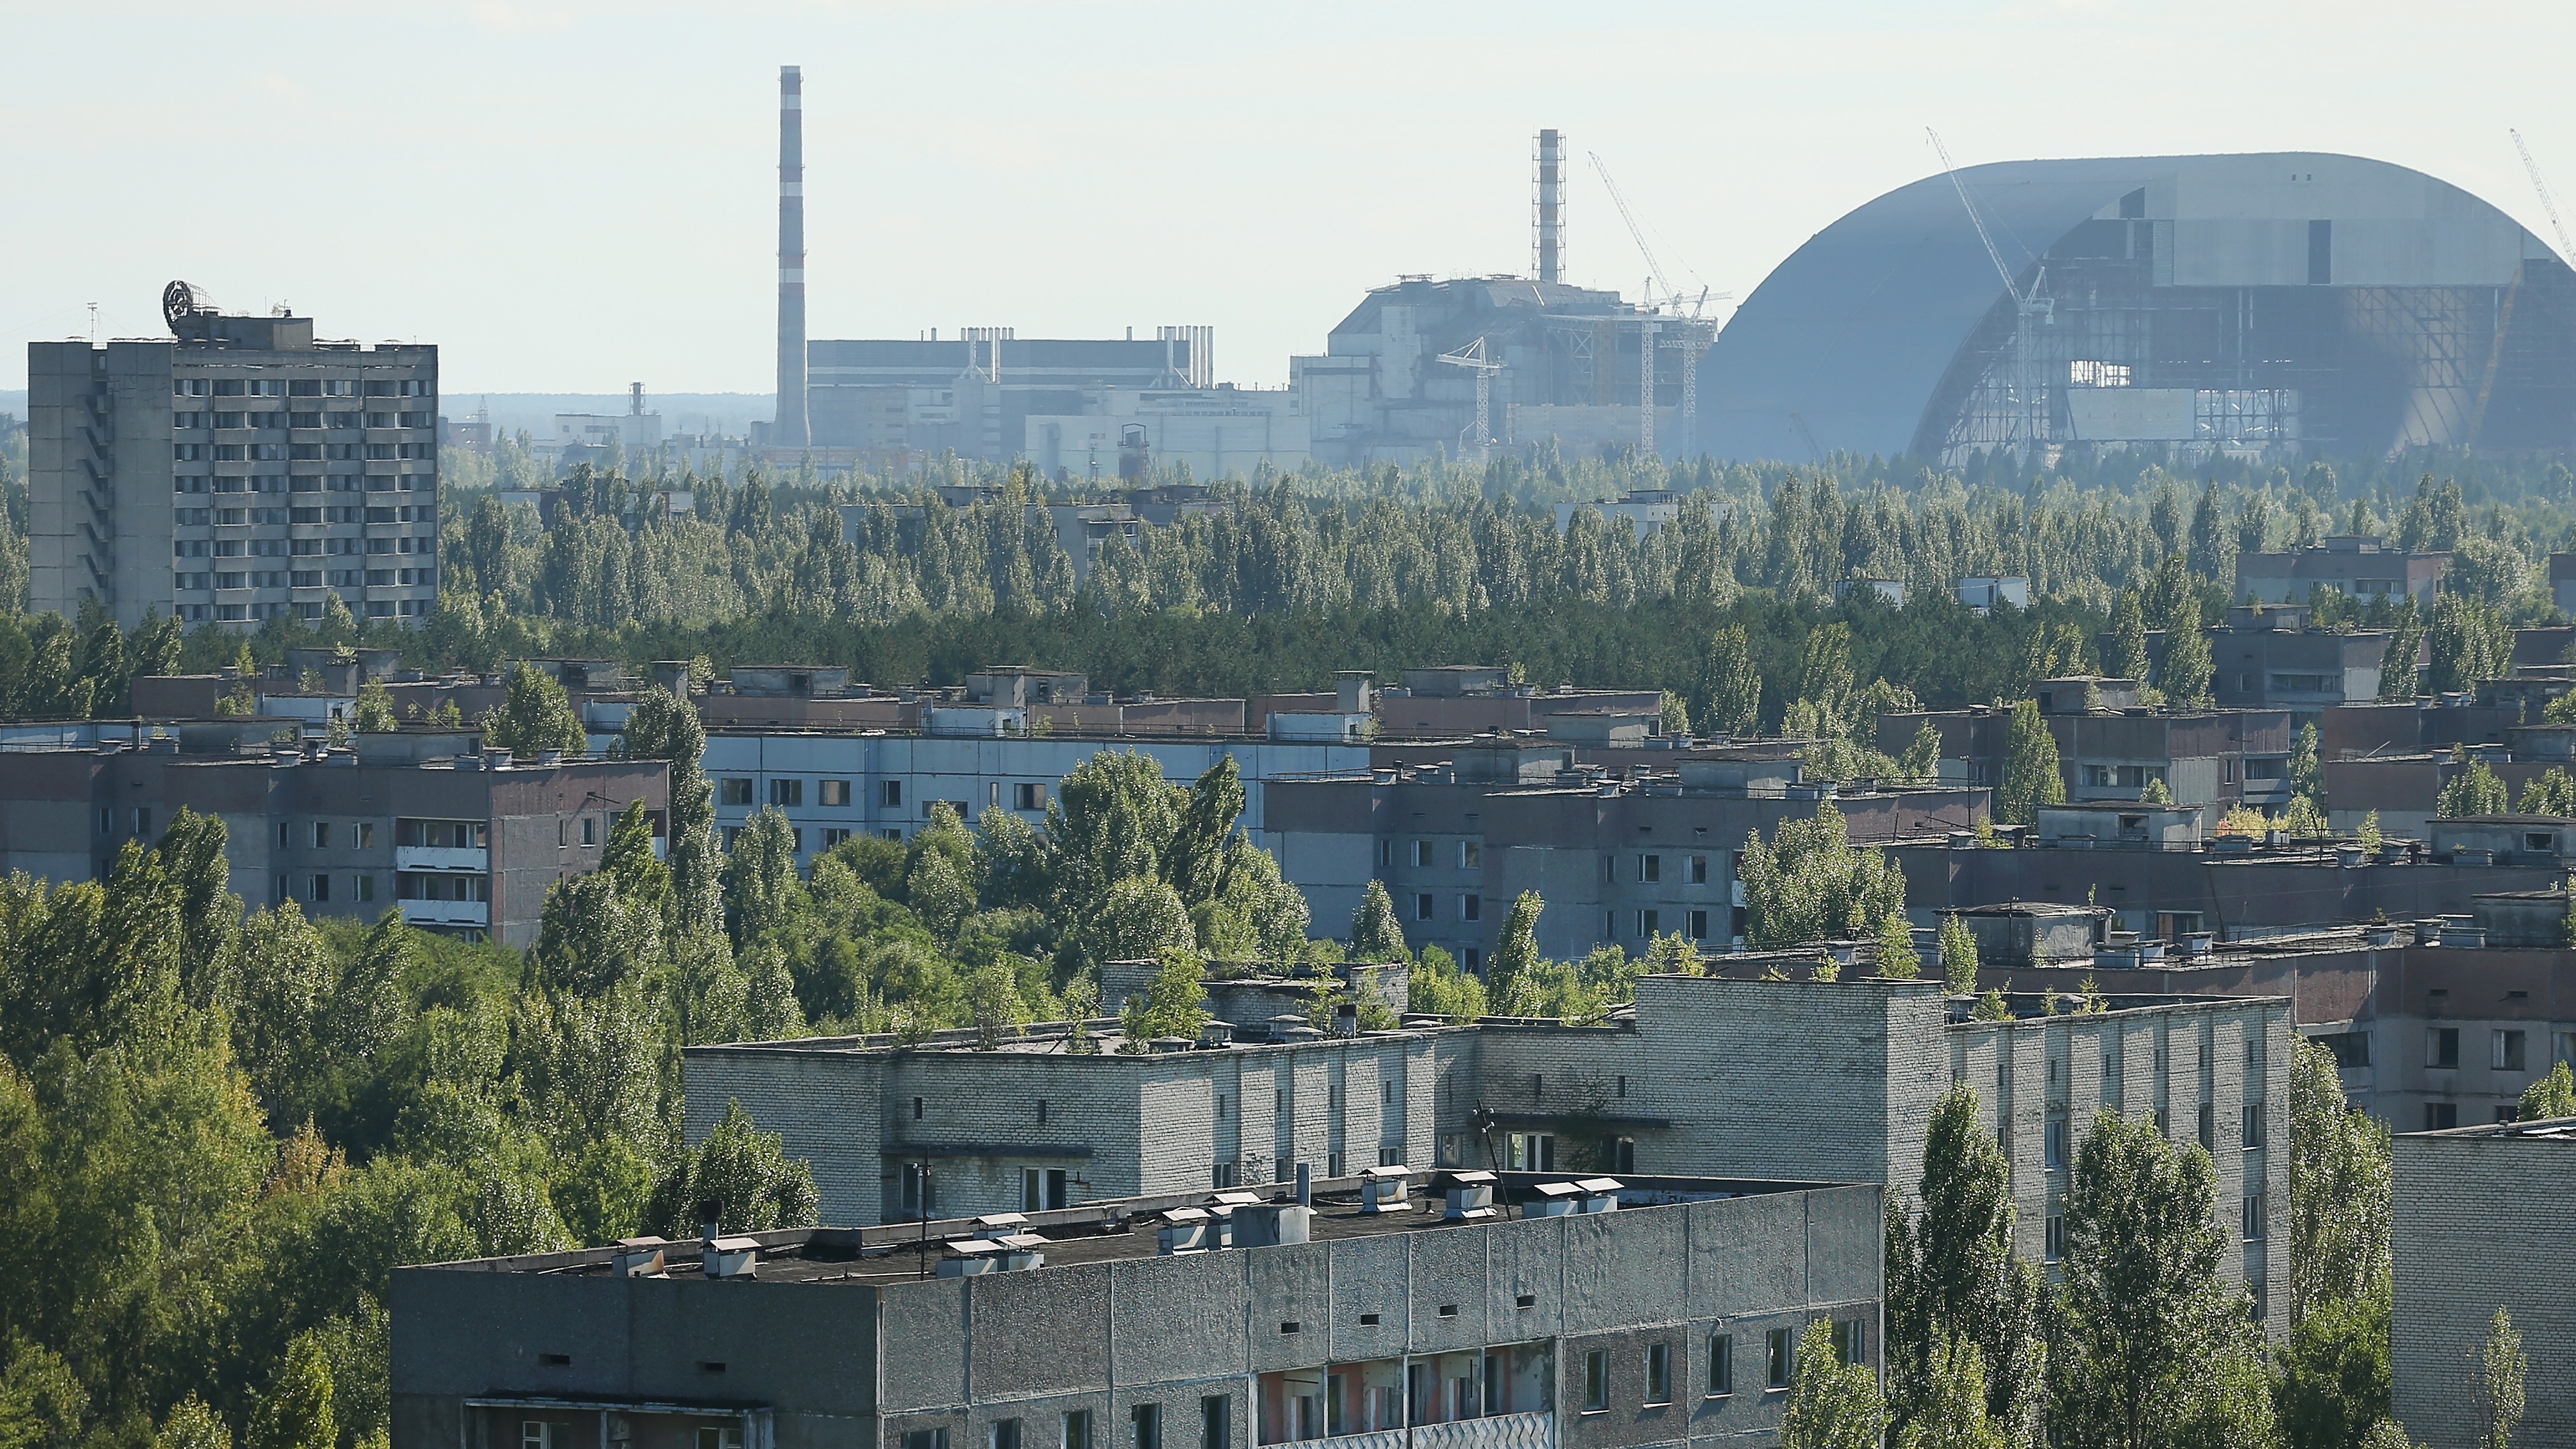 A view of the abandoned zone around the Chernobyl plant 